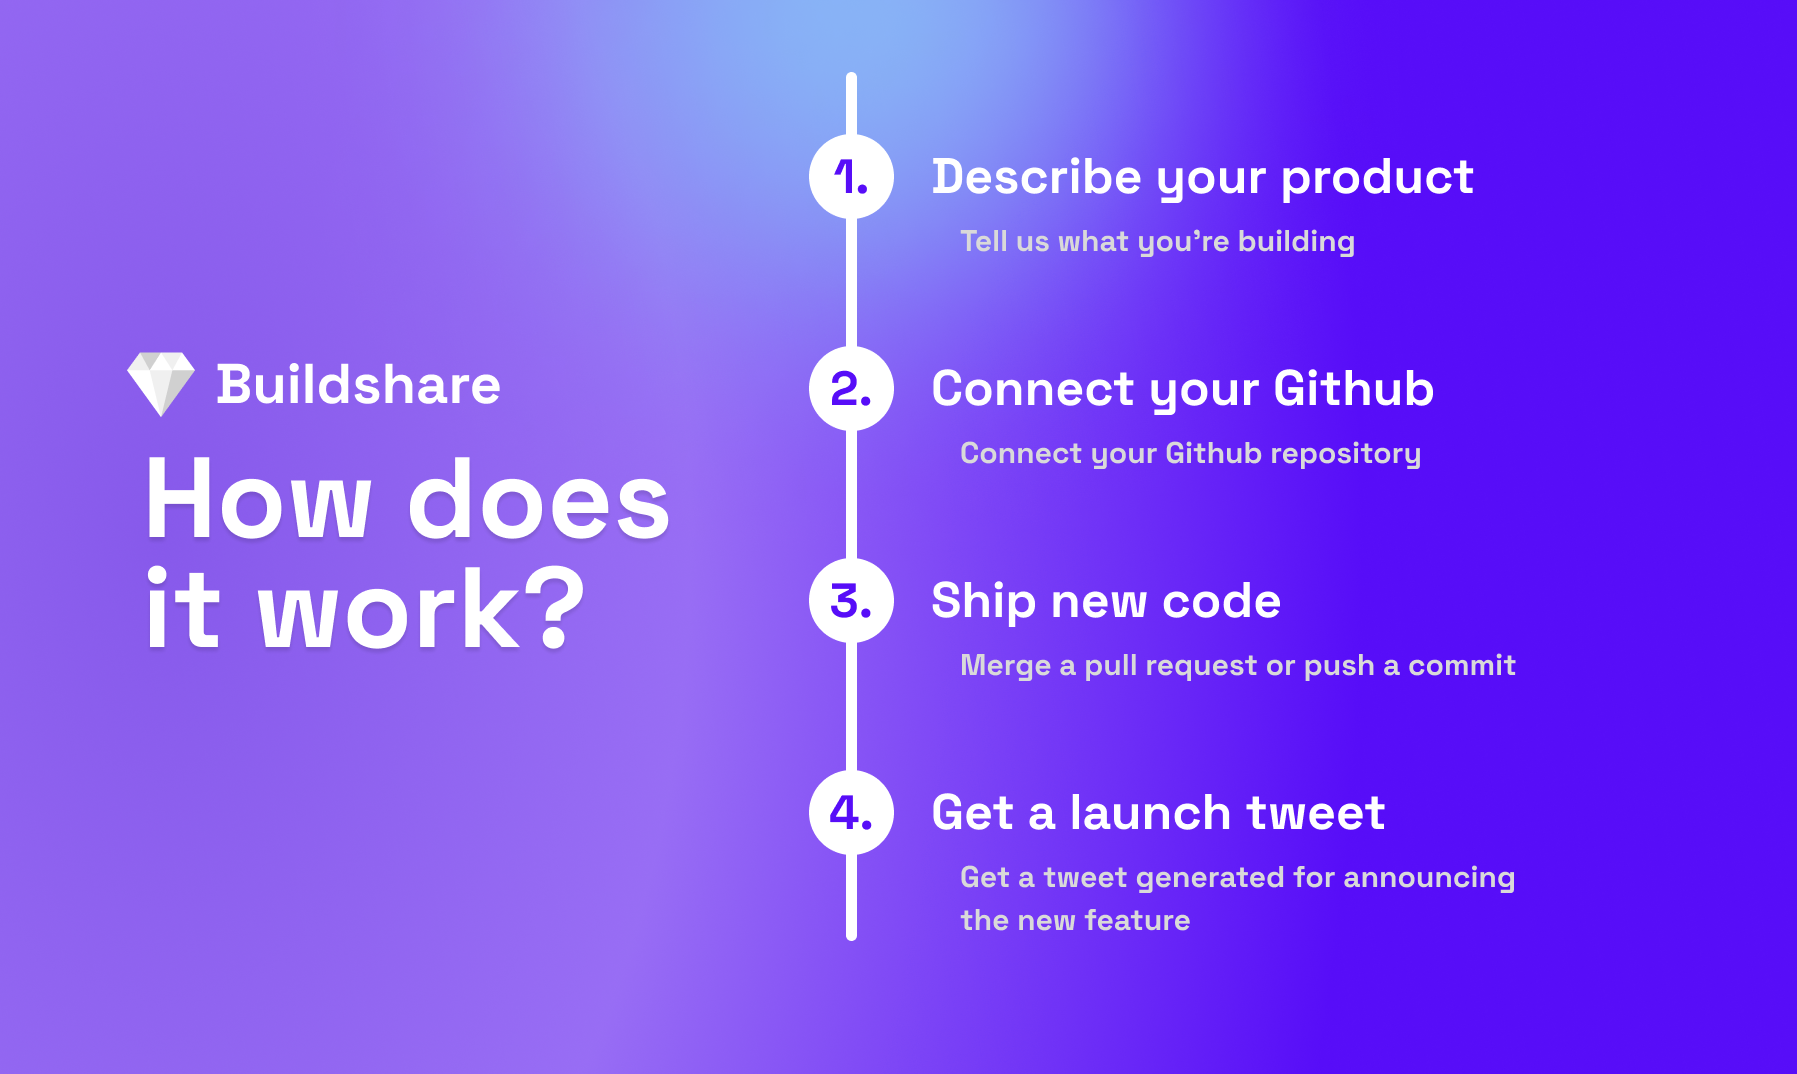 startuptile Buildshare-Generate launch tweets automatically when you ship new code